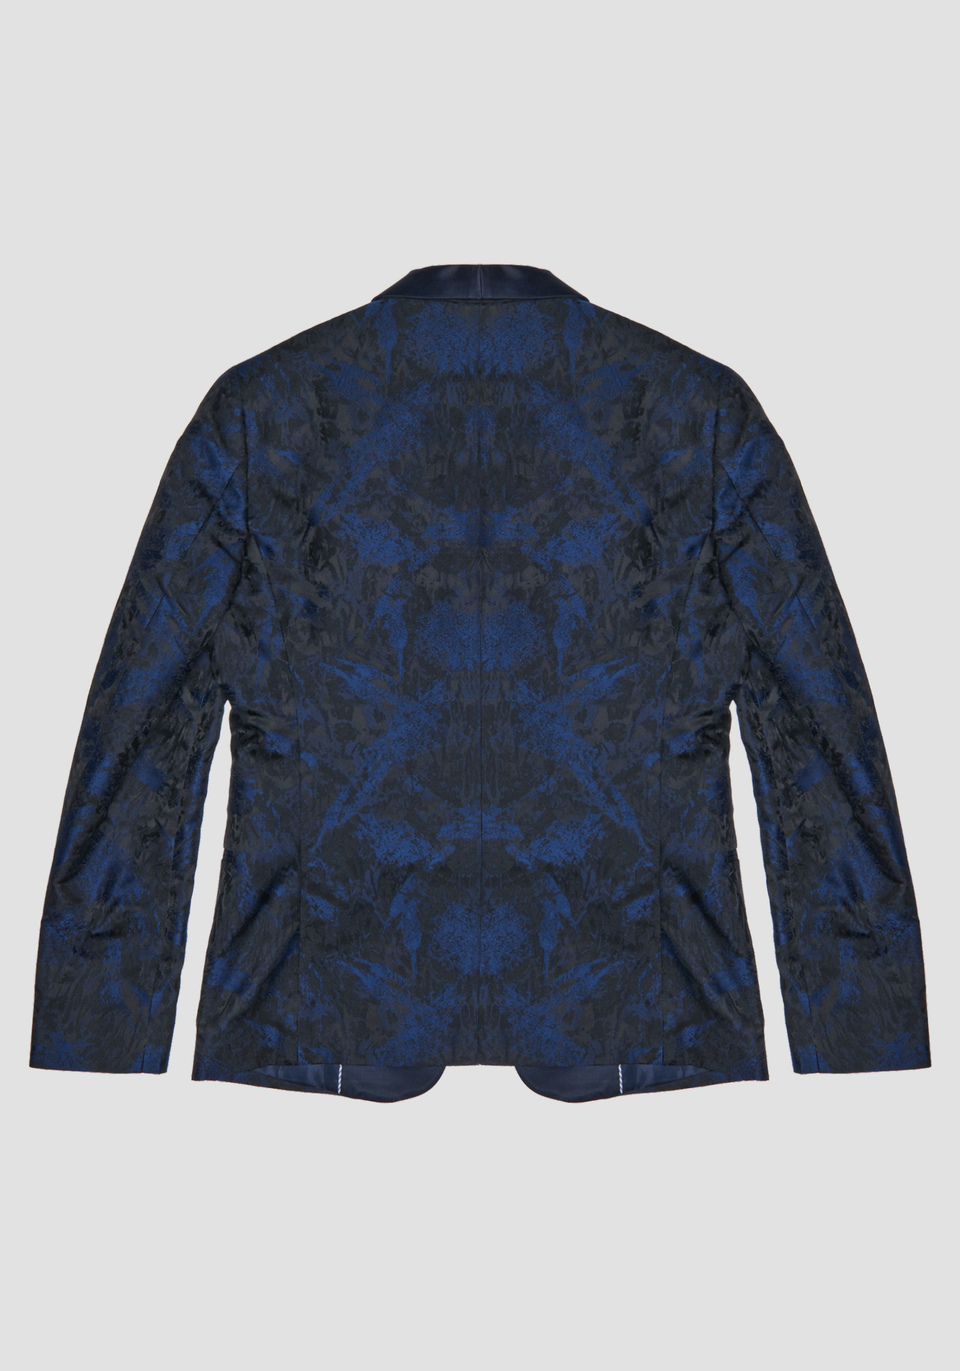 SLIM-FIT “BLANCHE” JACKET IN A SATIN-FINISH FABRIC WITH JACQUARD PATTERNING - Antony Morato Online Shop